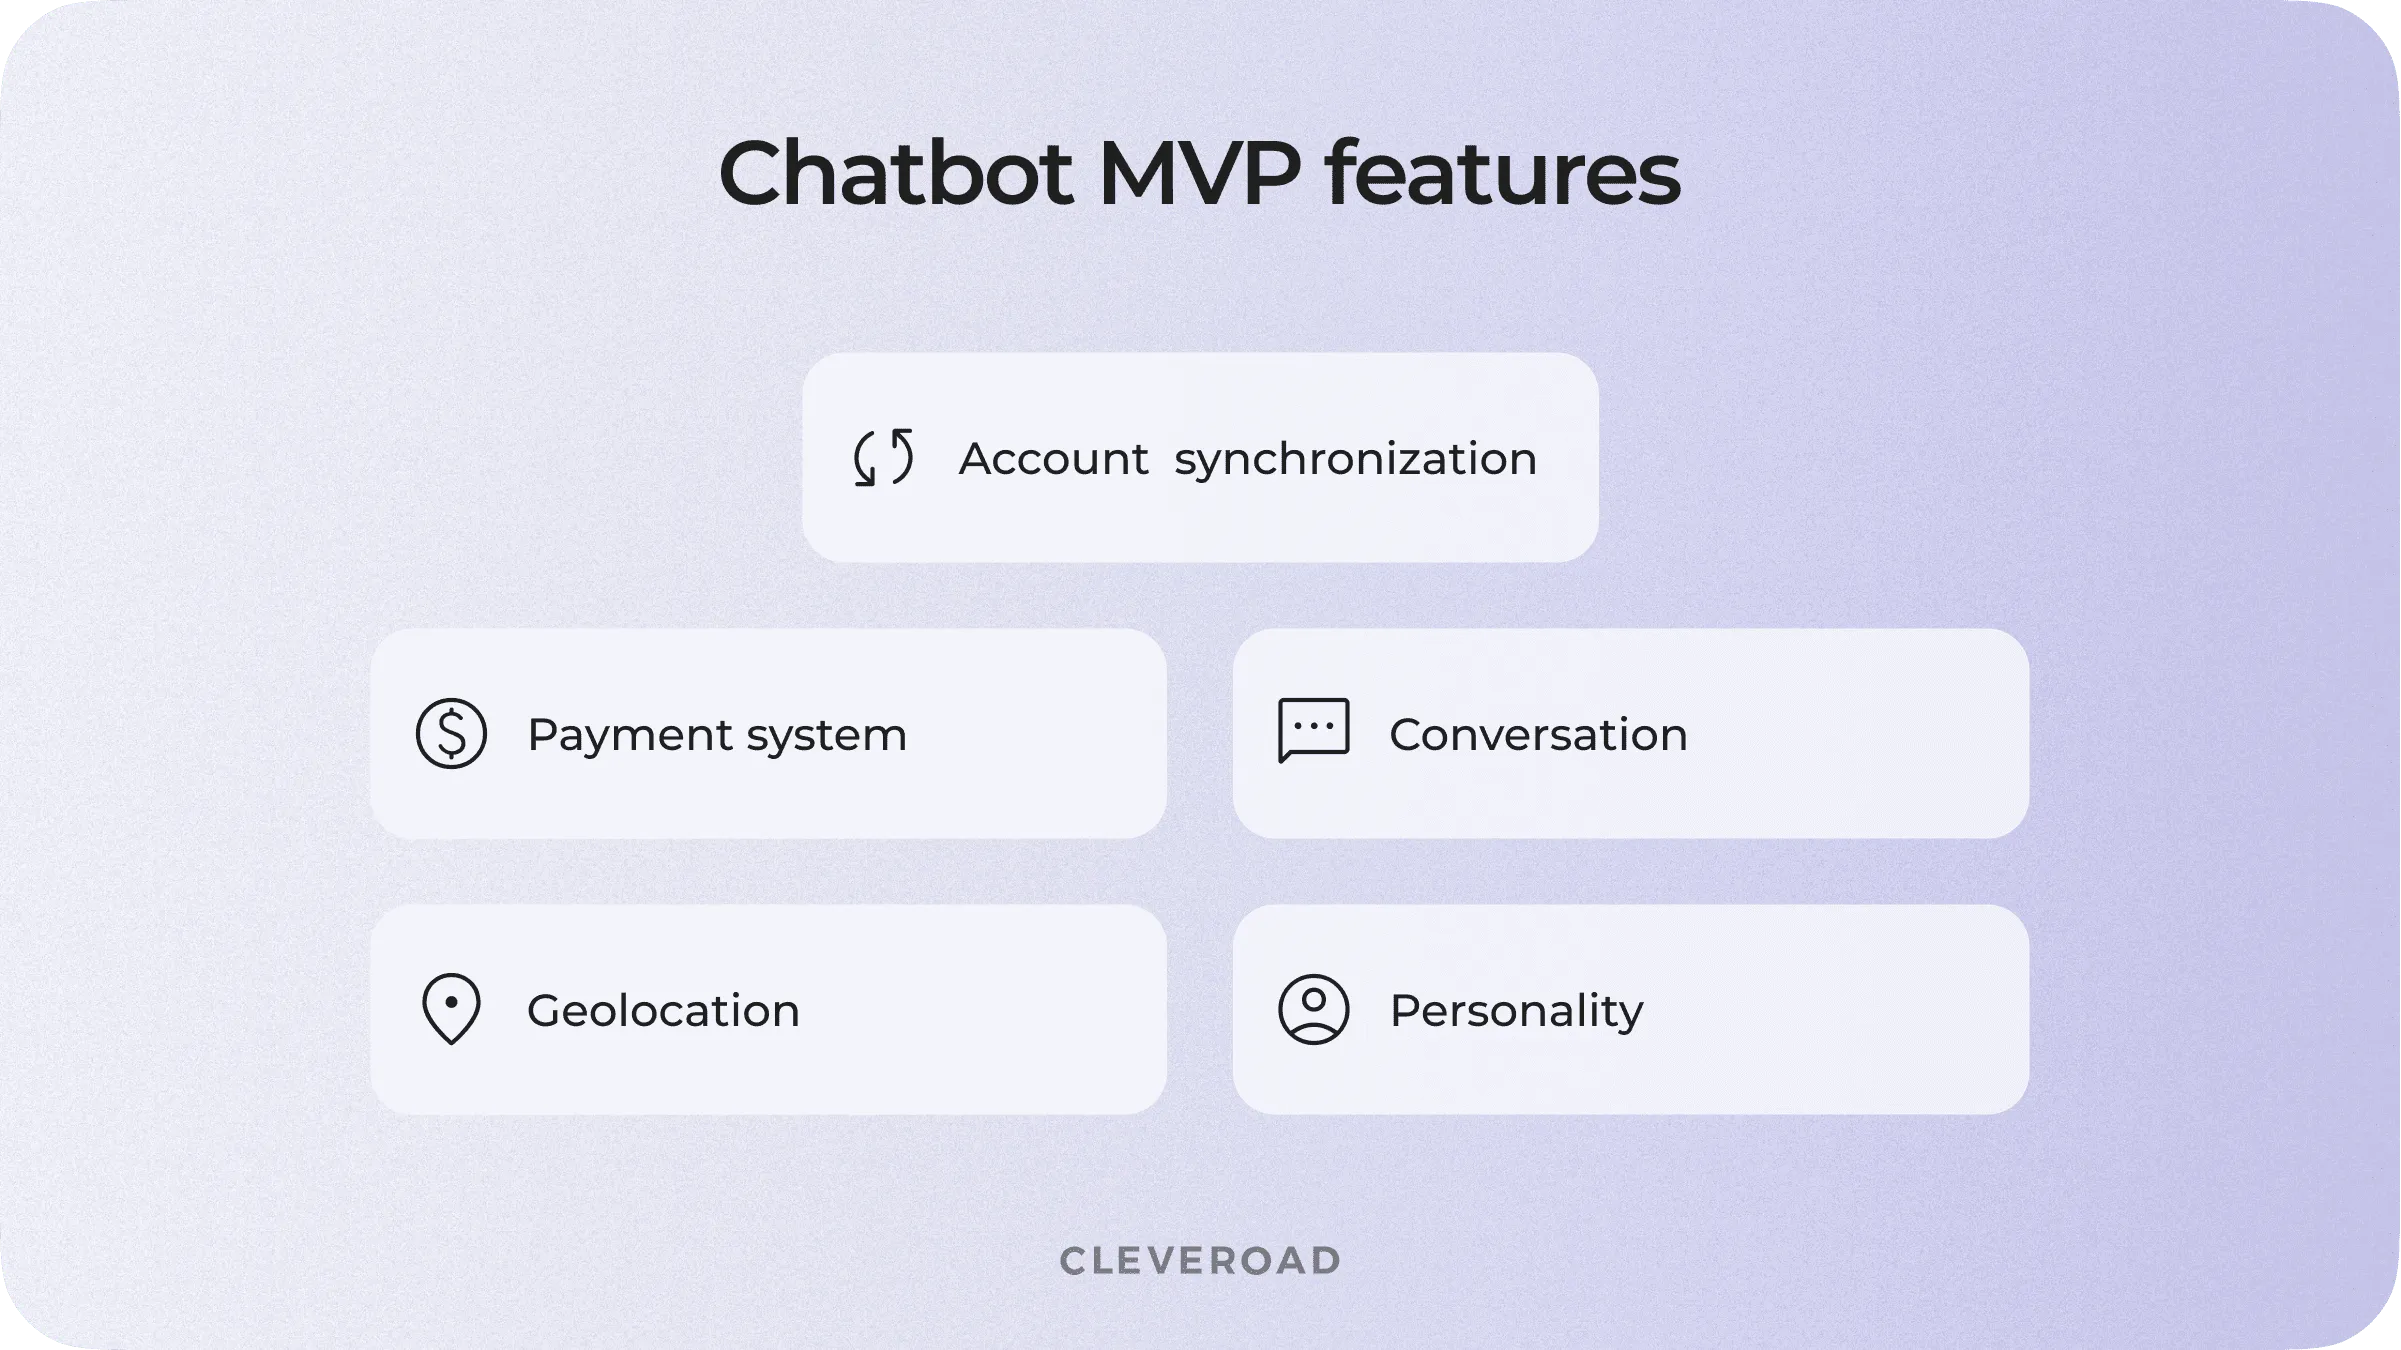 Main features for any chatbot